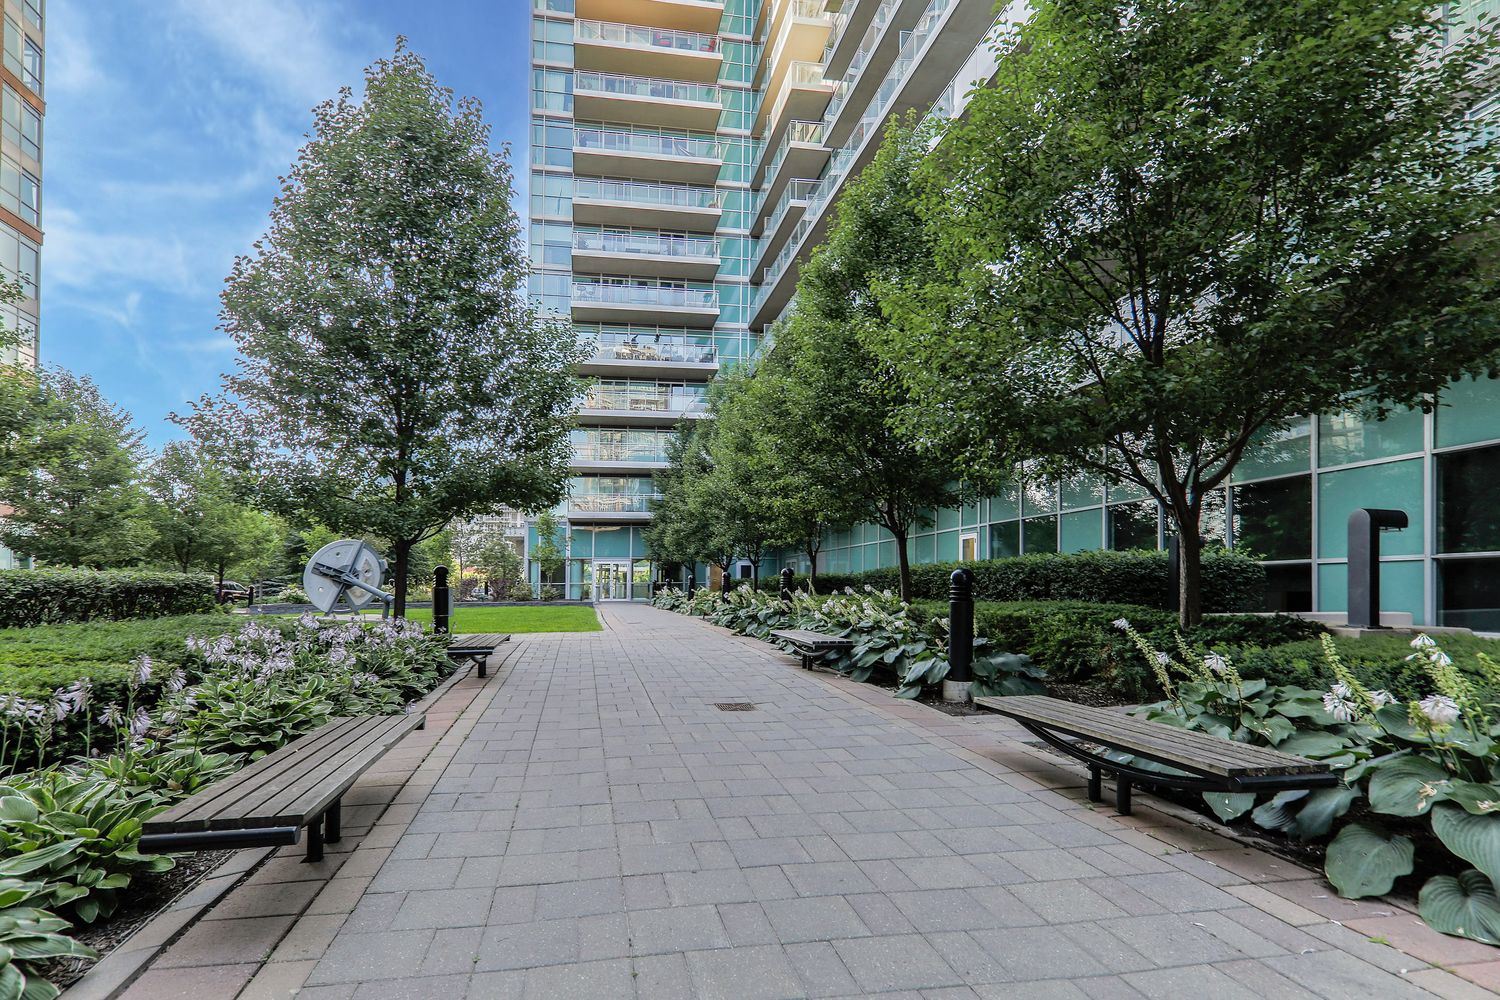 80 Western Battery Road. Zip Condos is located in  West End, Toronto - image #5 of 8